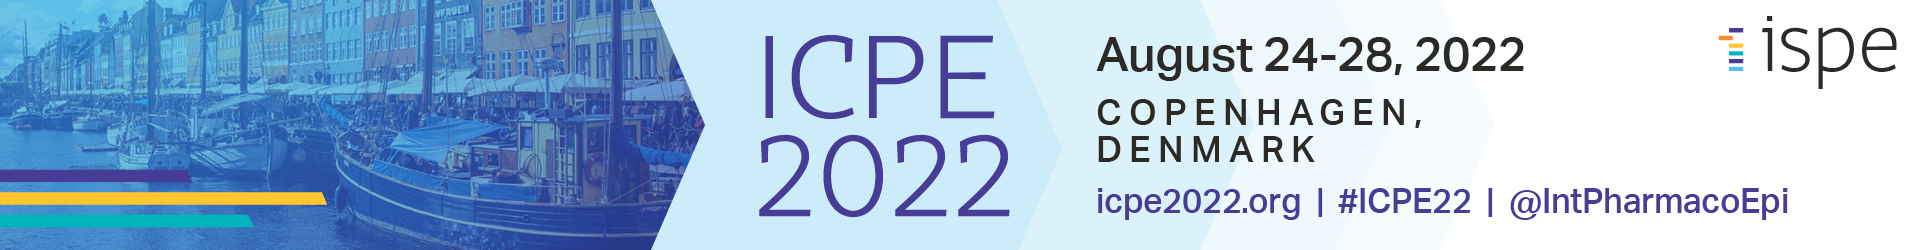 ICPE 2022 Event Banner